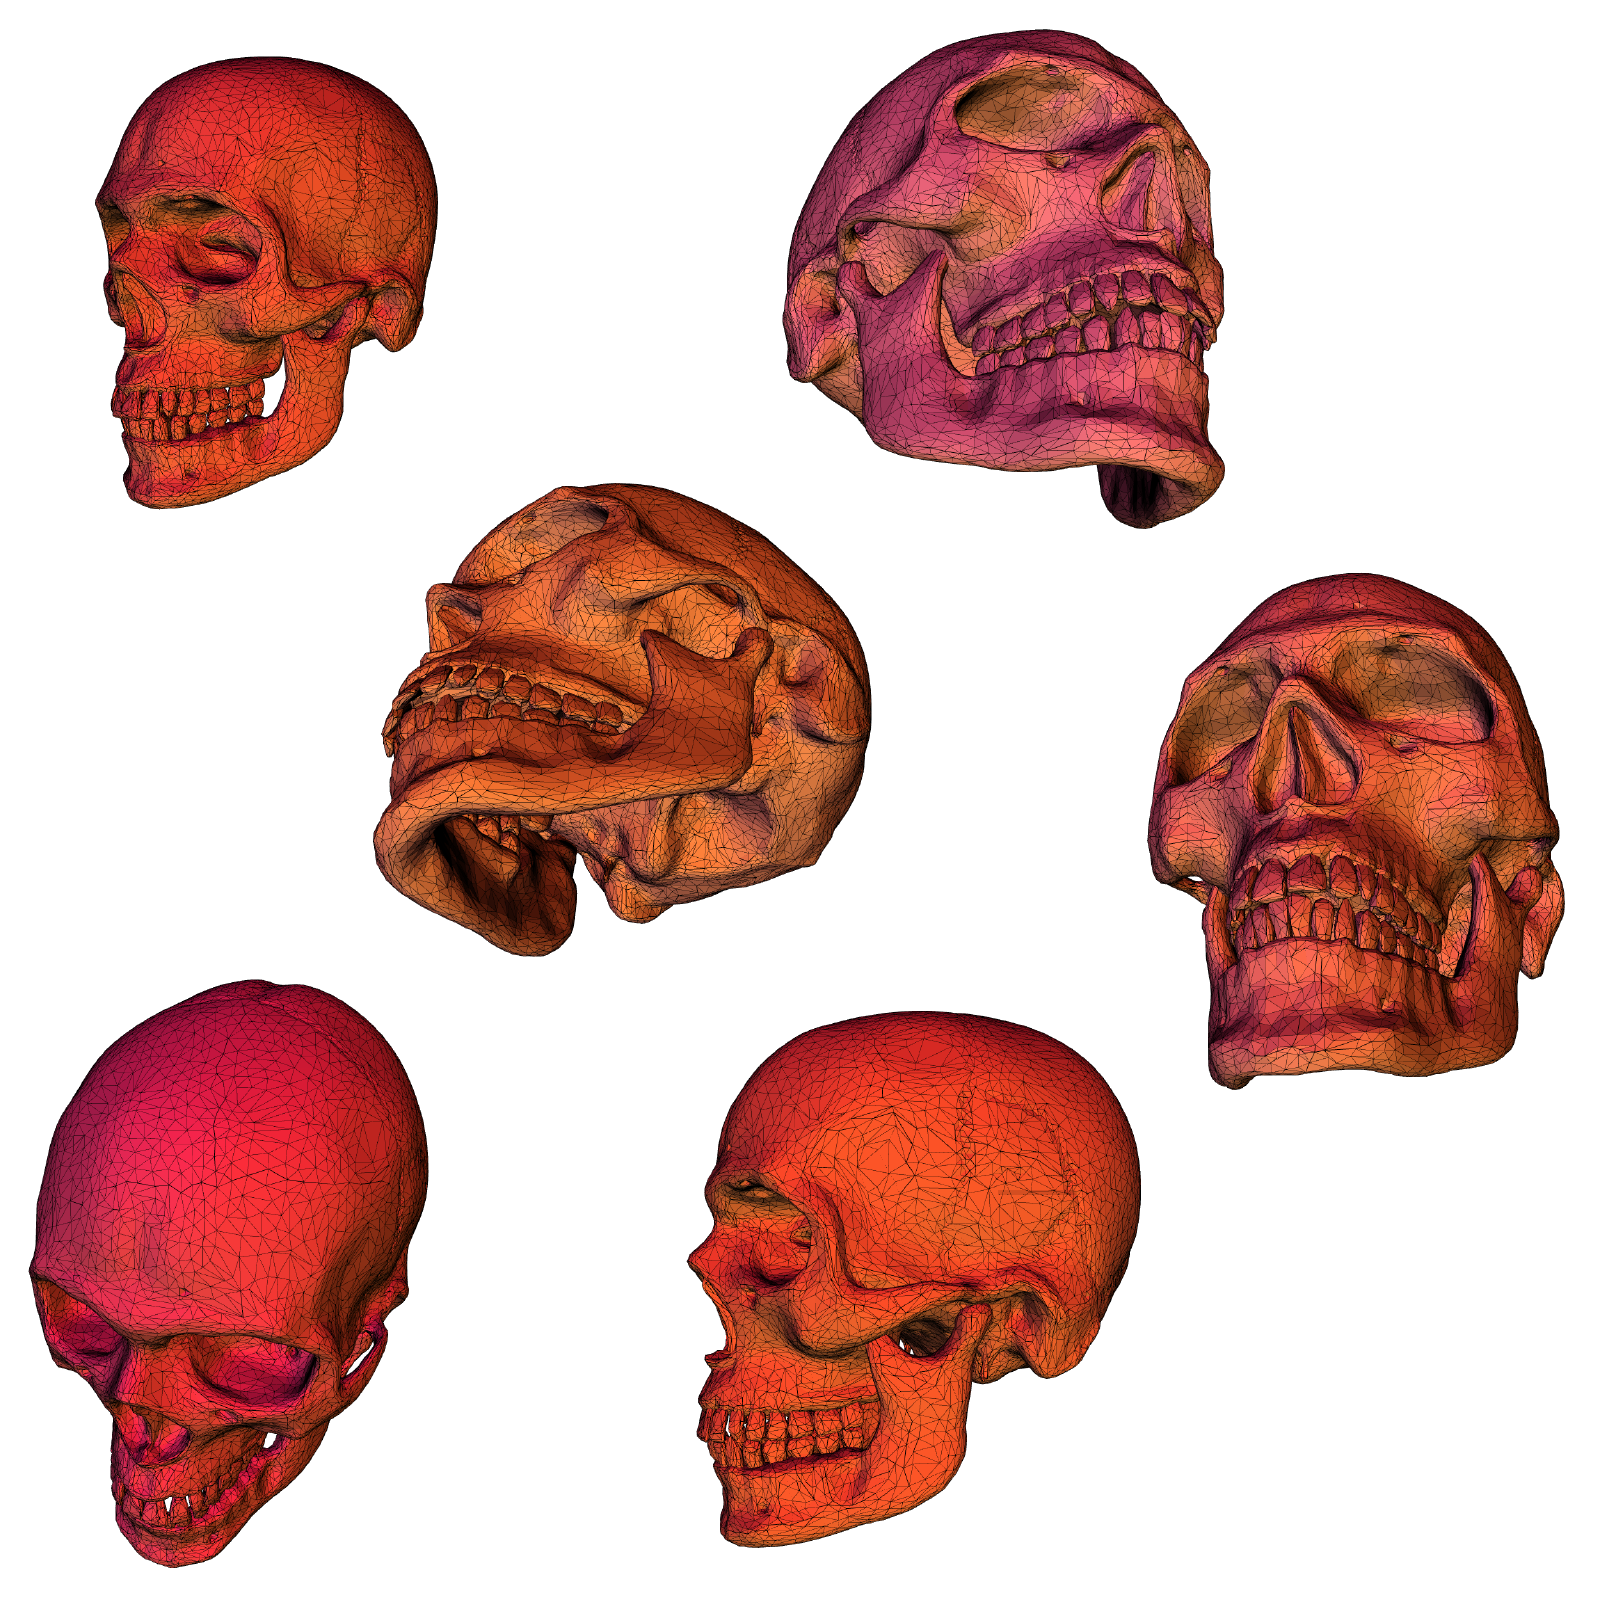 Here are some example 3d models you can find on the Practice Drawing This website